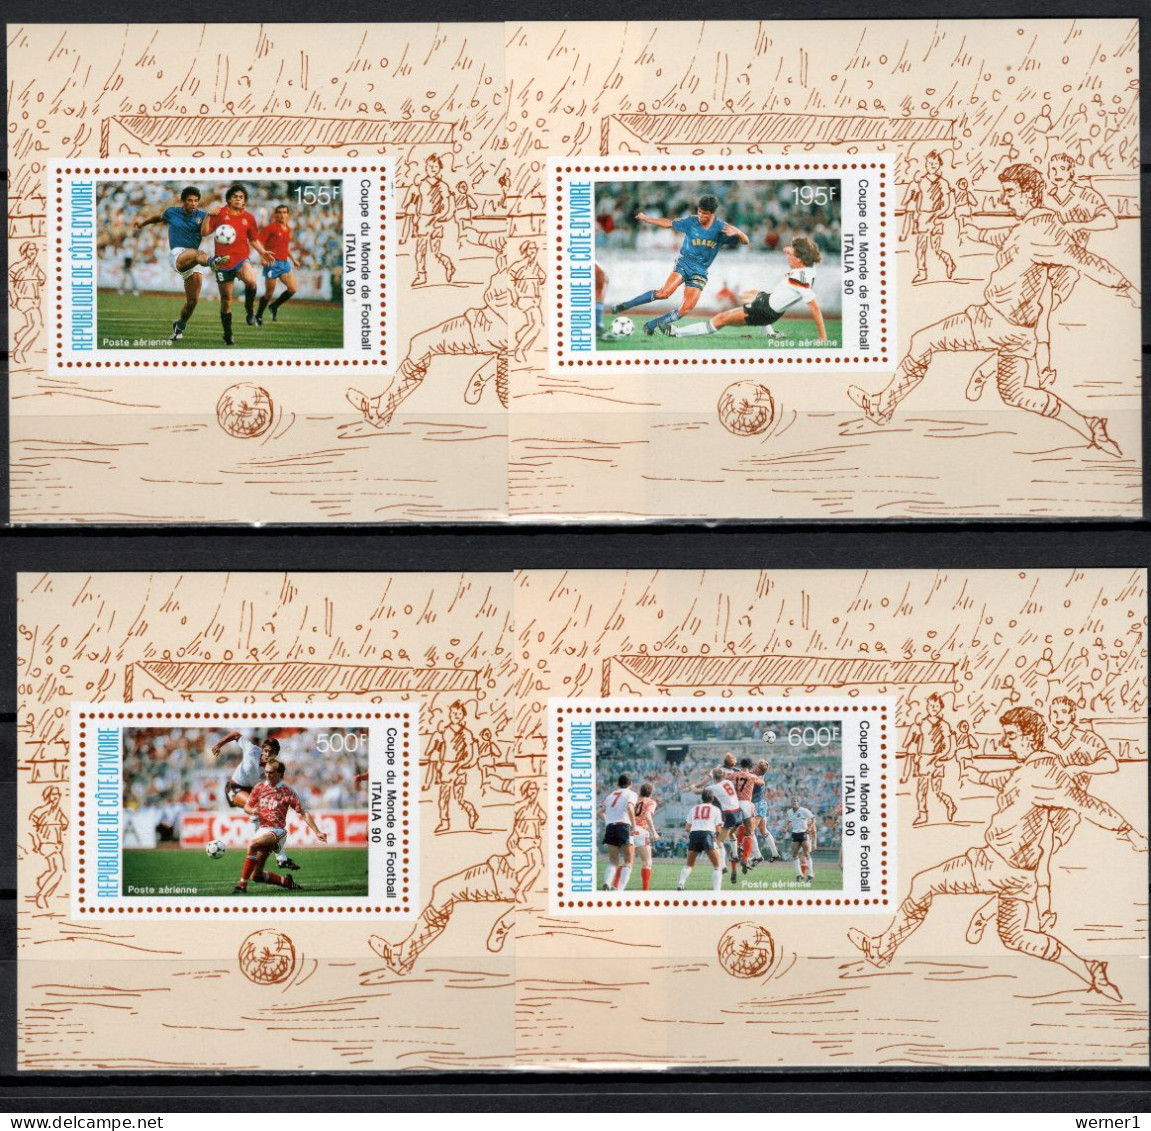 Ivory Coast 1990 Football Soccer World Cup Set Of 4 S/s Imperf. MNH -scarce- - 1990 – Italien